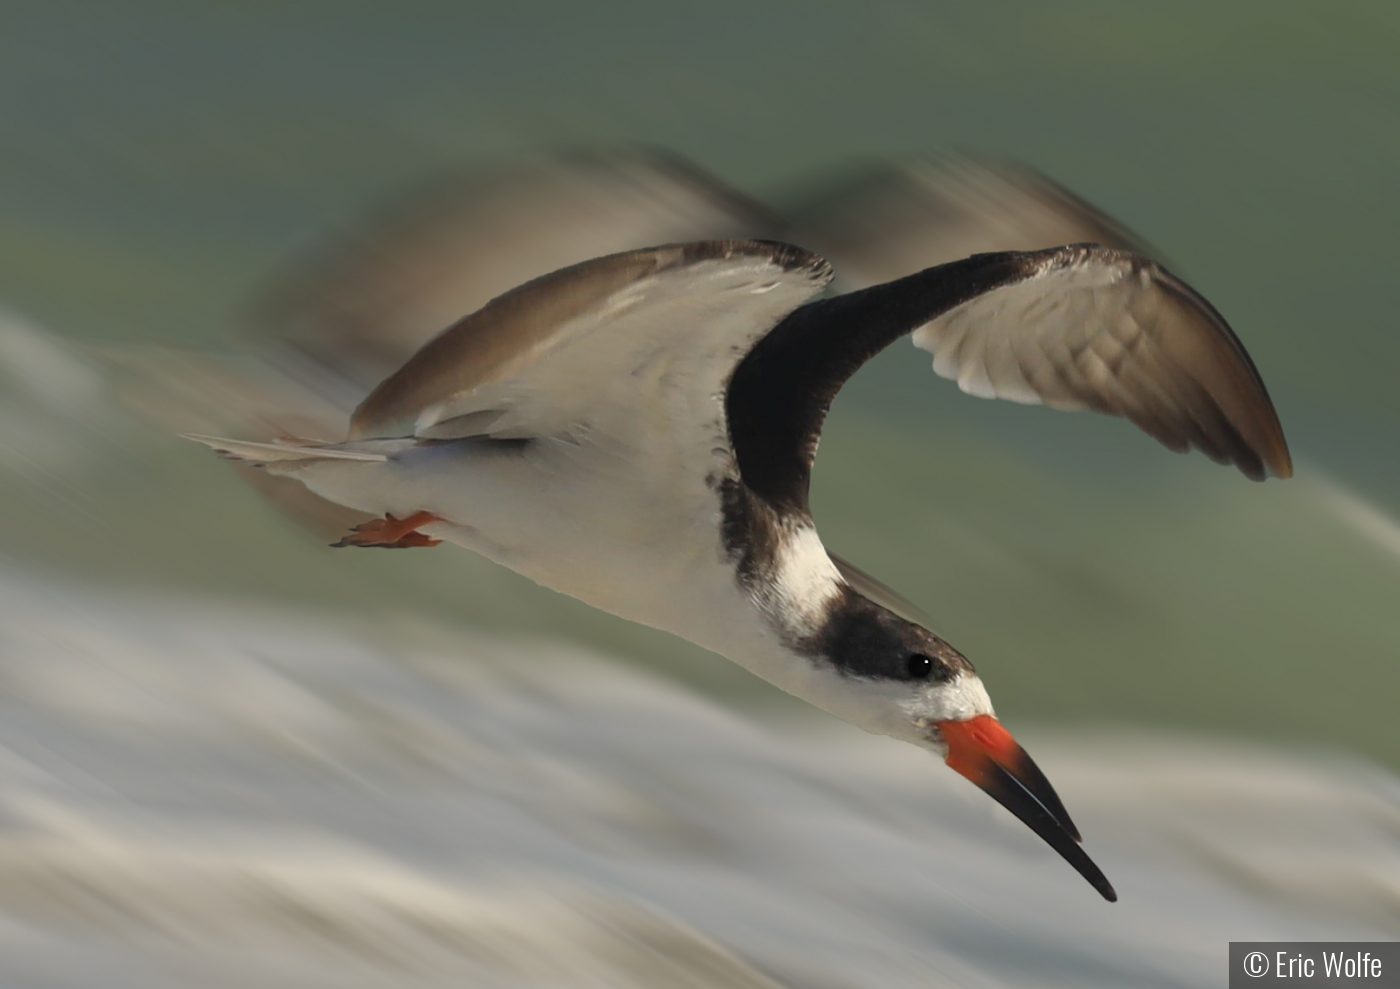 Incoming -- Black Skimmer by Eric Wolfe